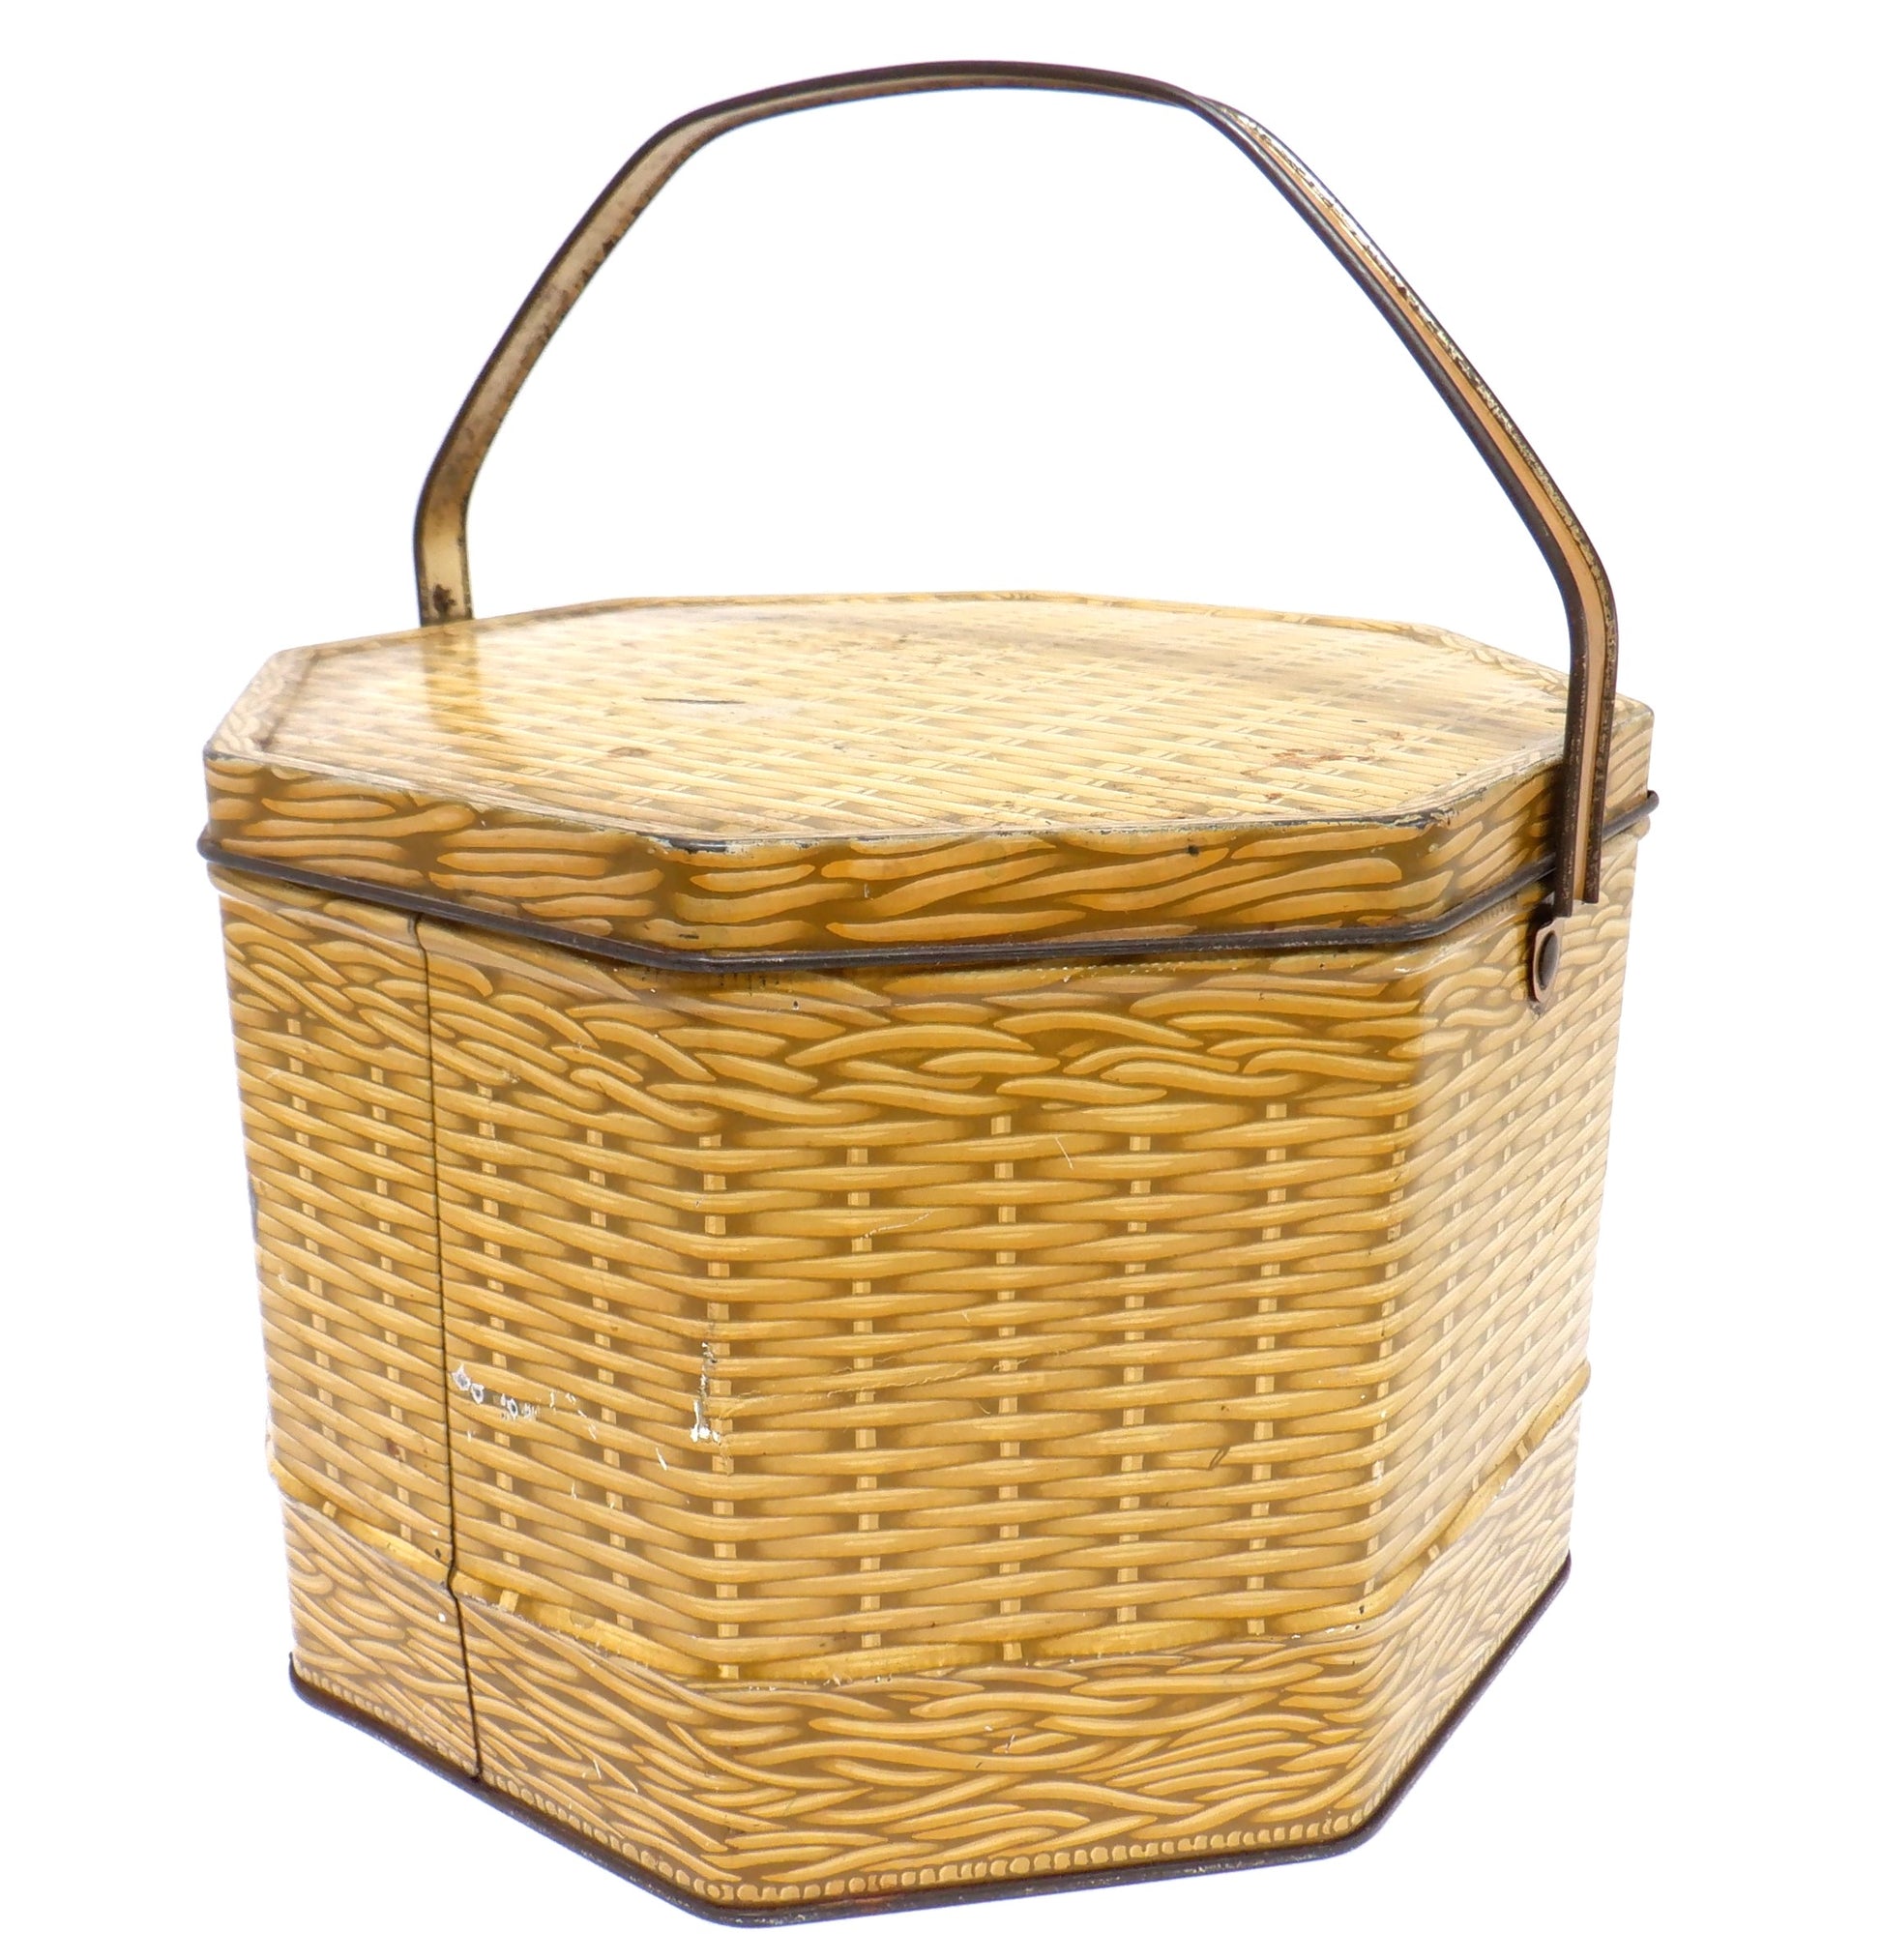 The Famous Antique American Wicker Picnic Basket Tin, by The LOOSE